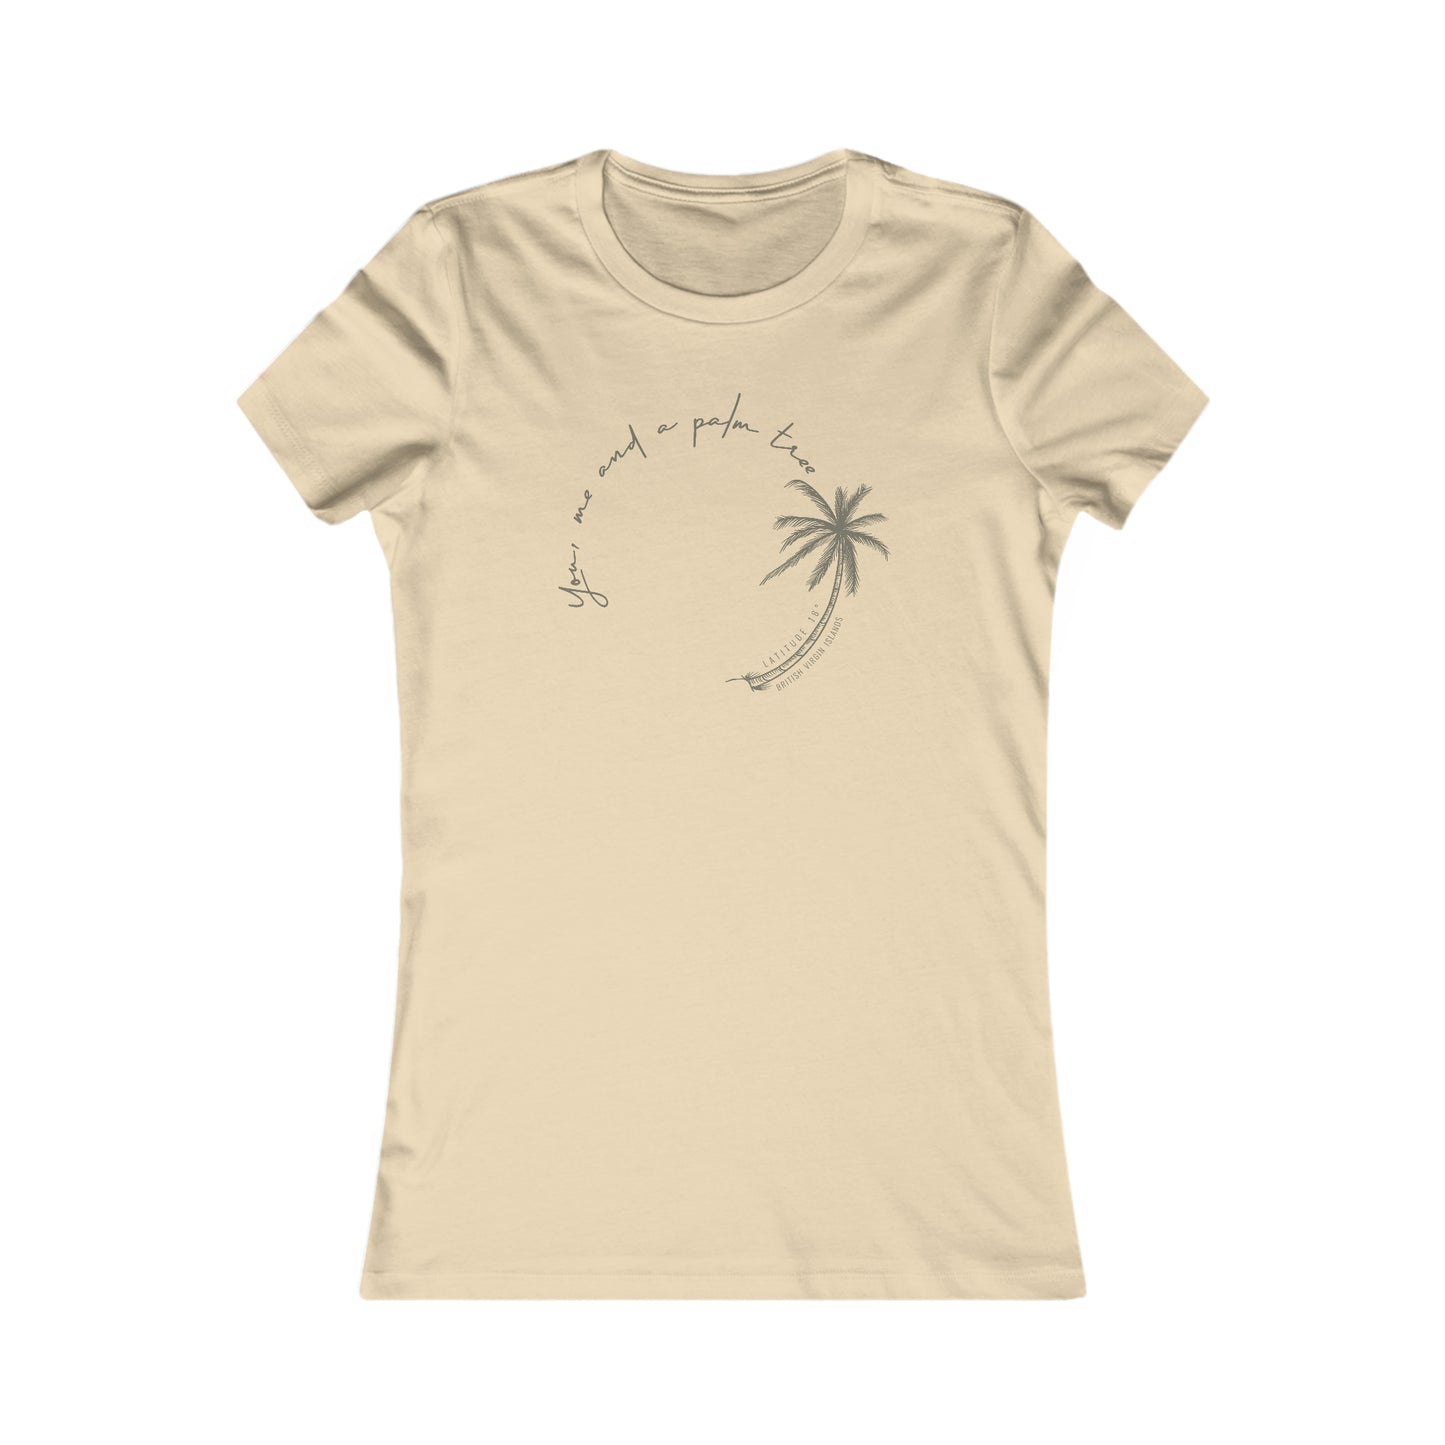 "You, Me and a Palm Tree" Women's S/S Tee